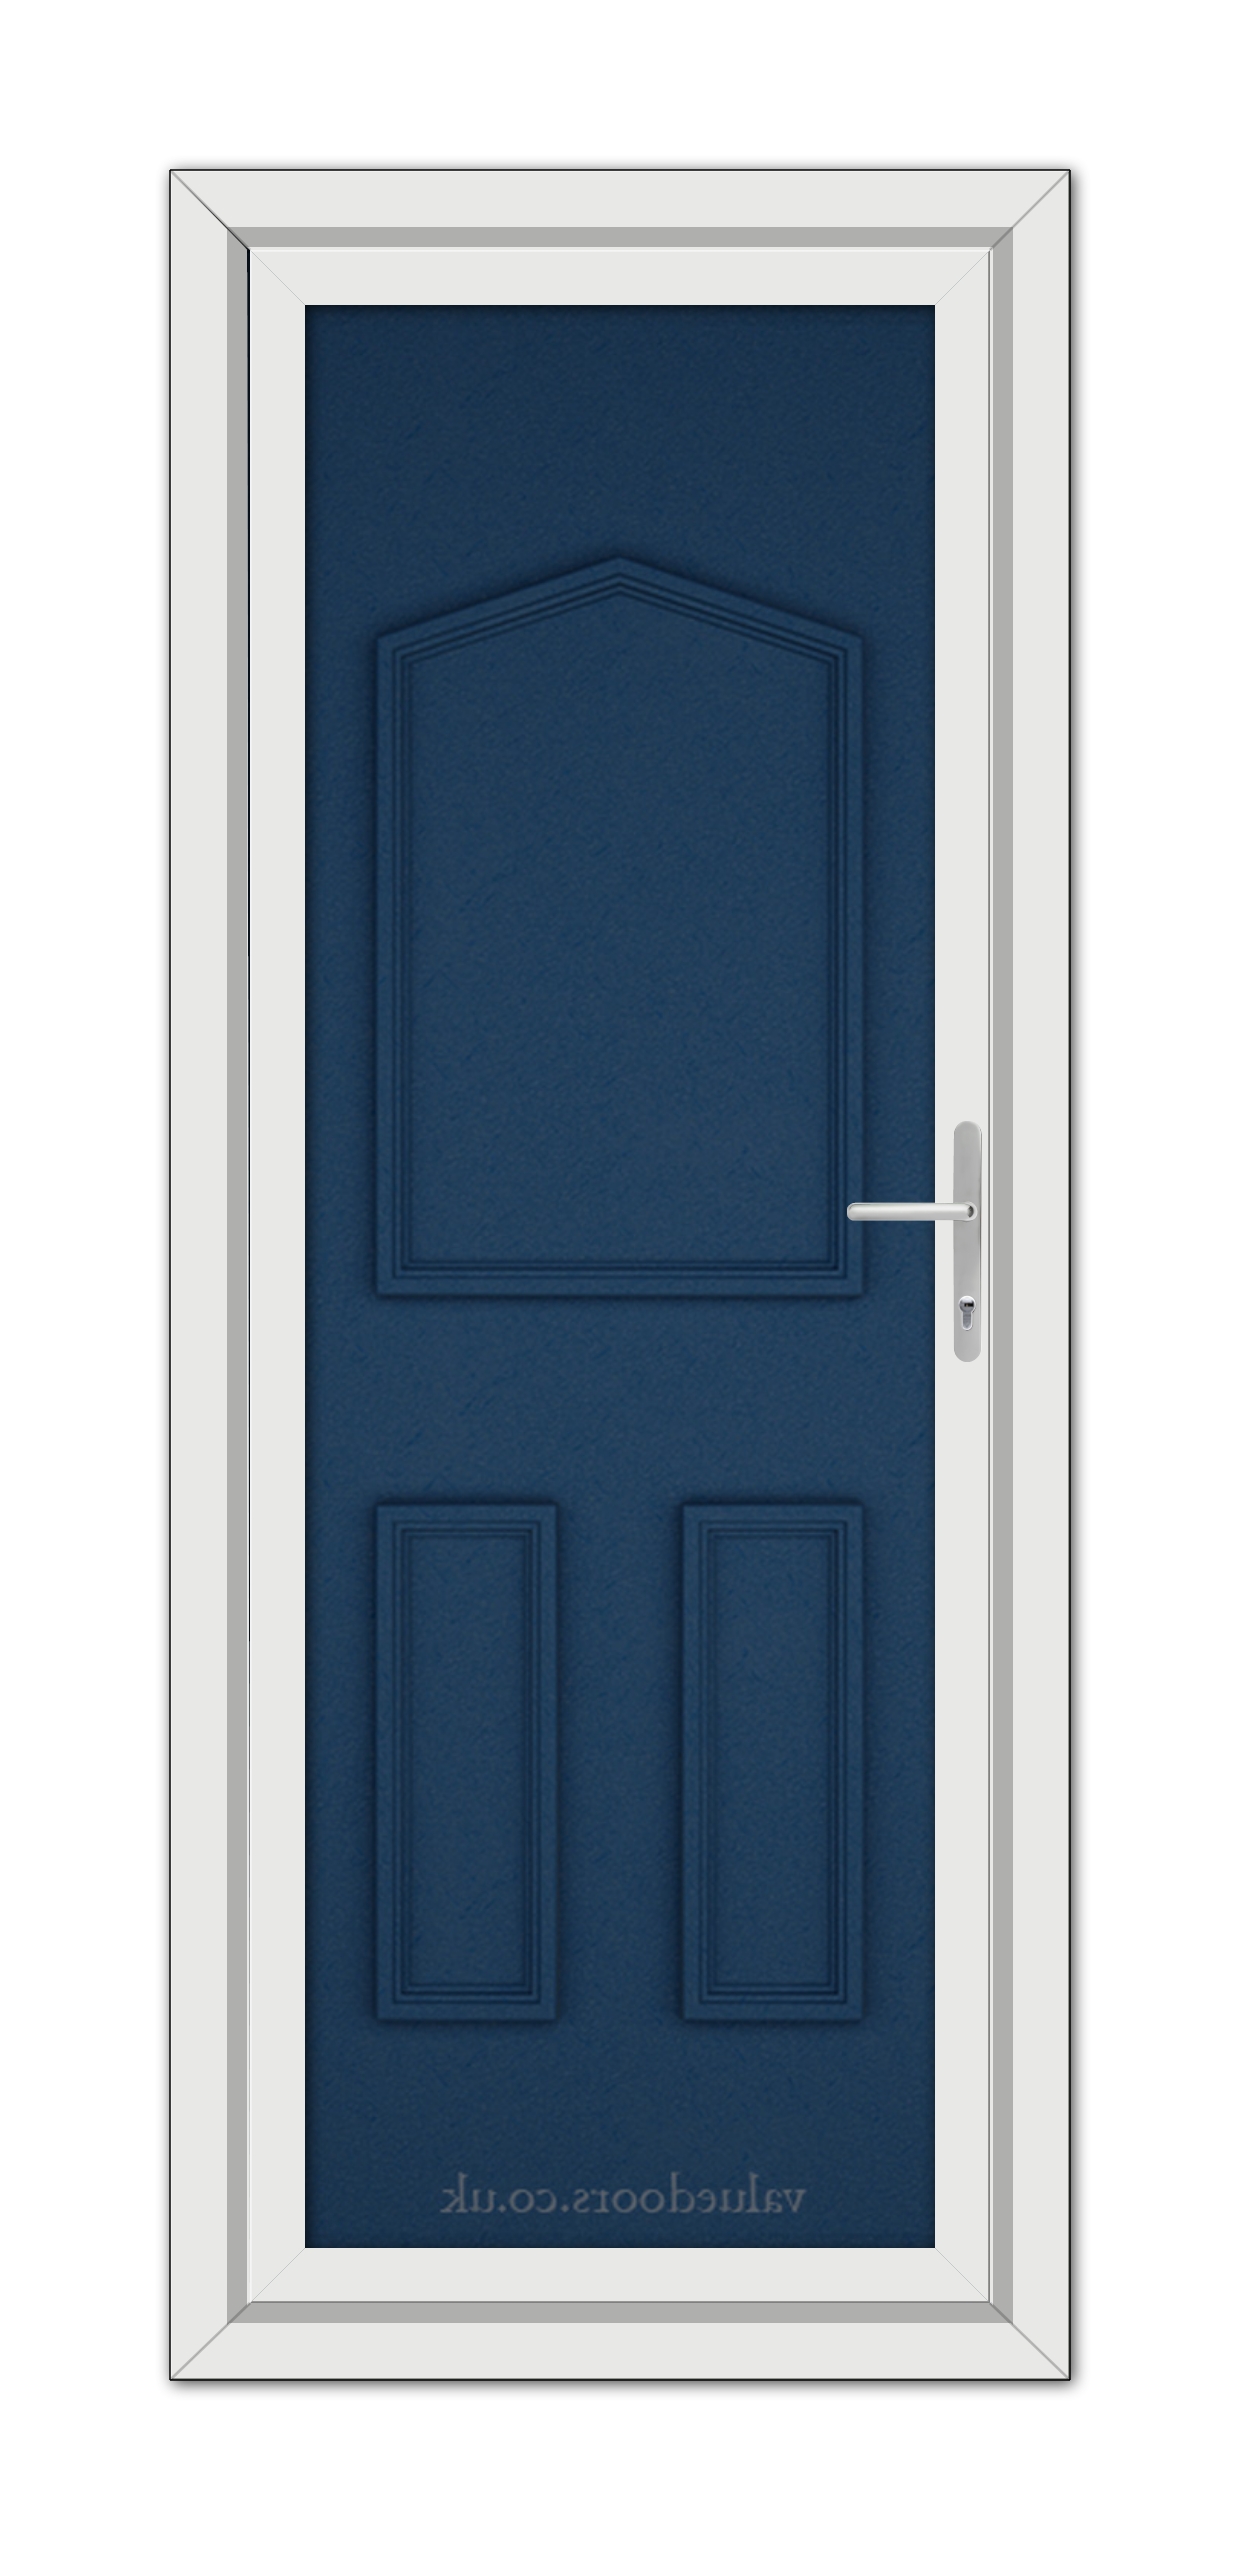 A vertical image of a closed Blue Oxford Solid uPVC Door with a white frame and a metallic handle, set within a white door frame.